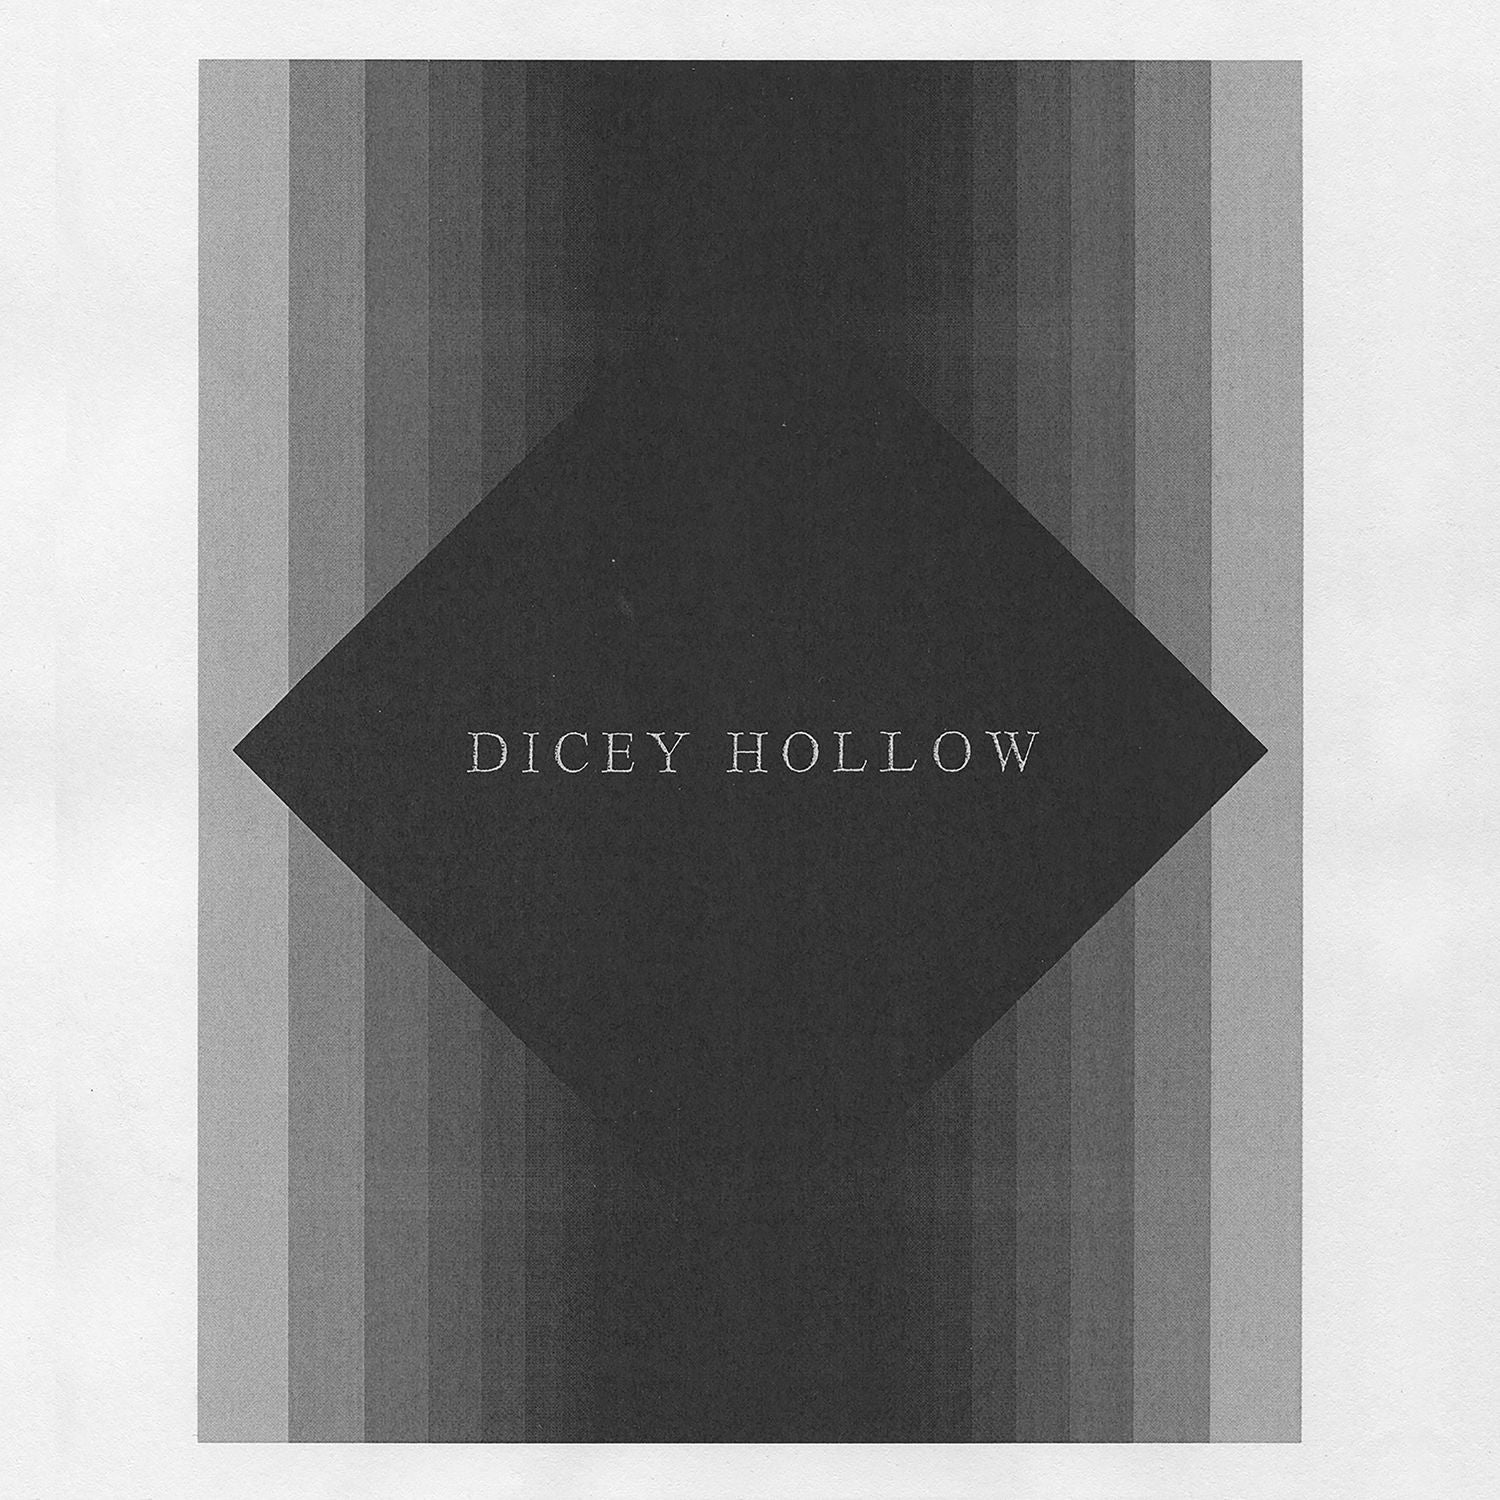 Dicey Hollow